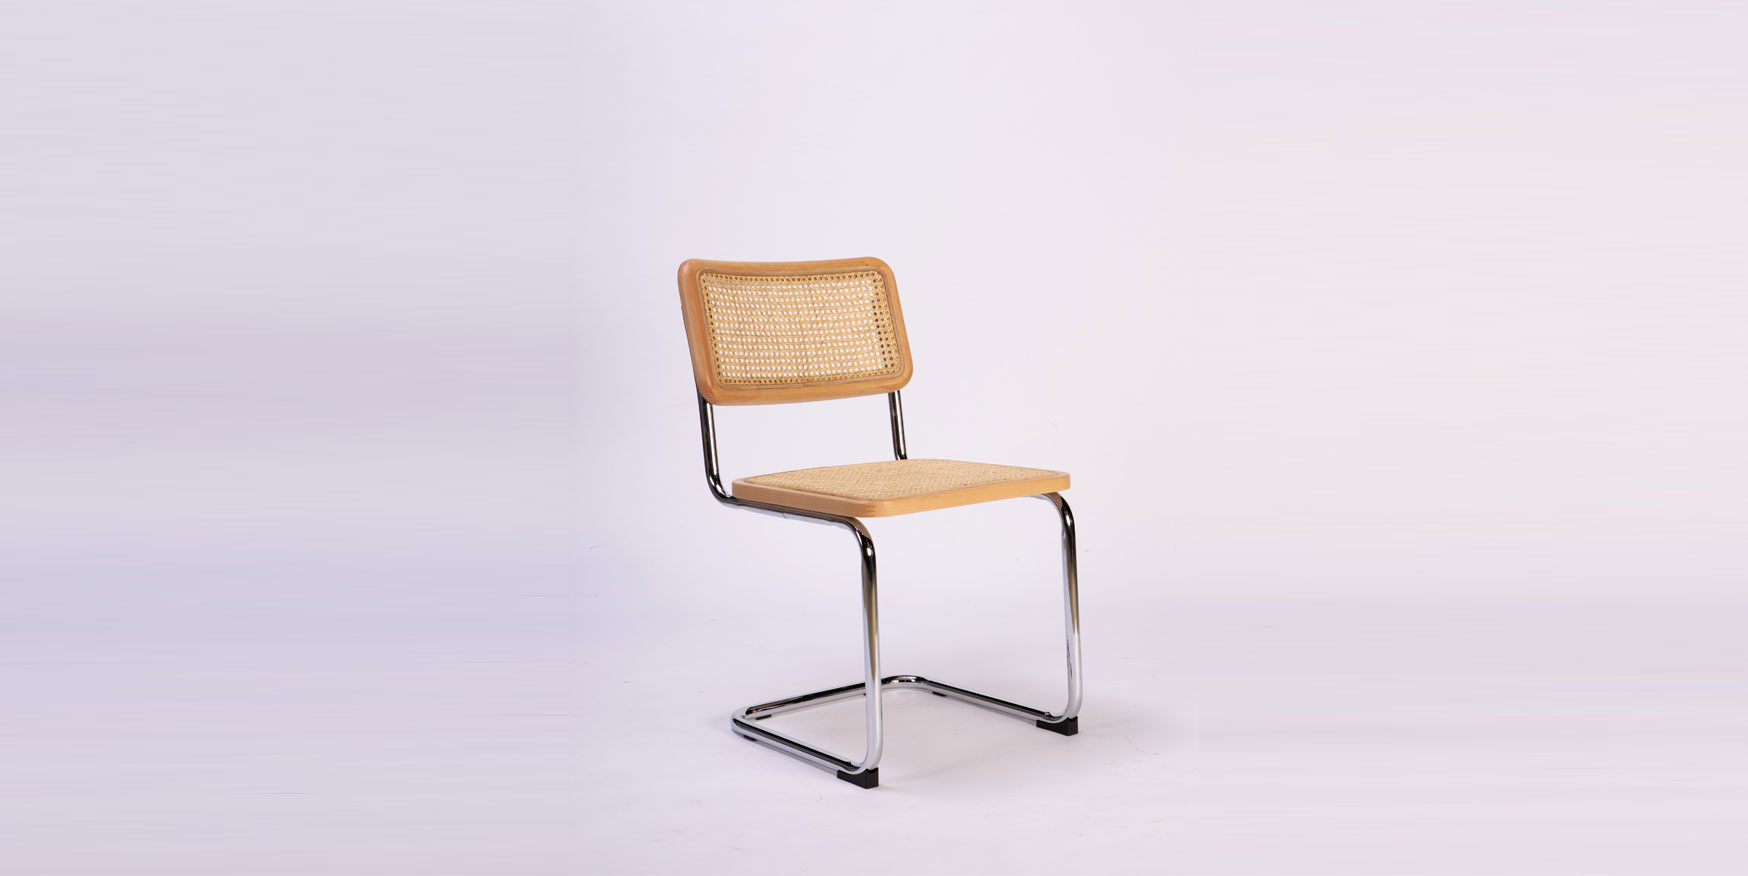 woven seat dining chair
